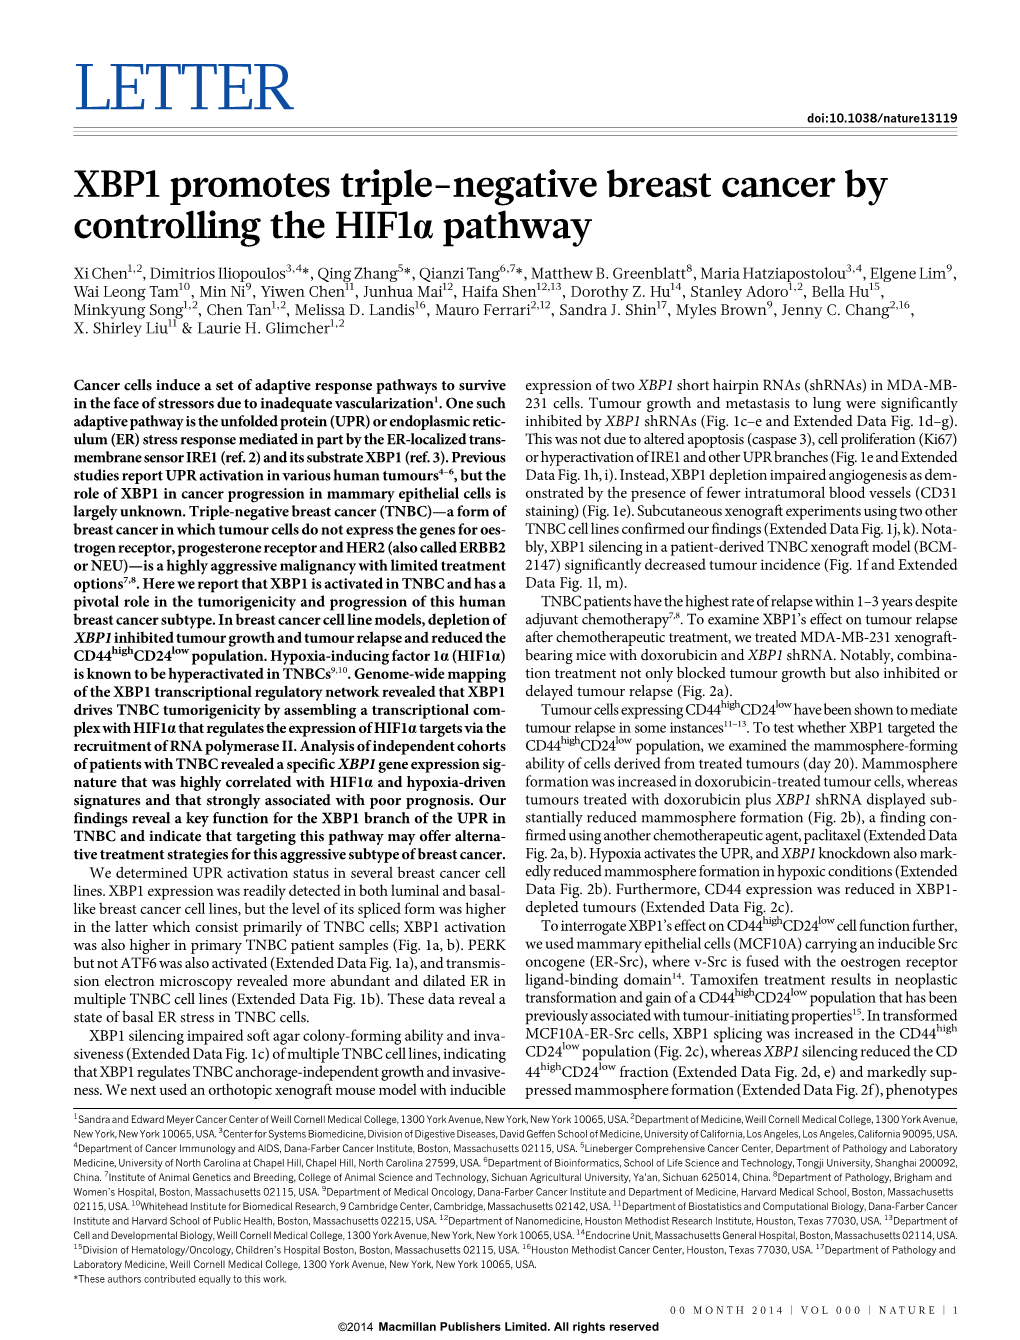 XBP1 Promotes Triple-Negative Breast Cancer by Controlling the Hif1α Pathway